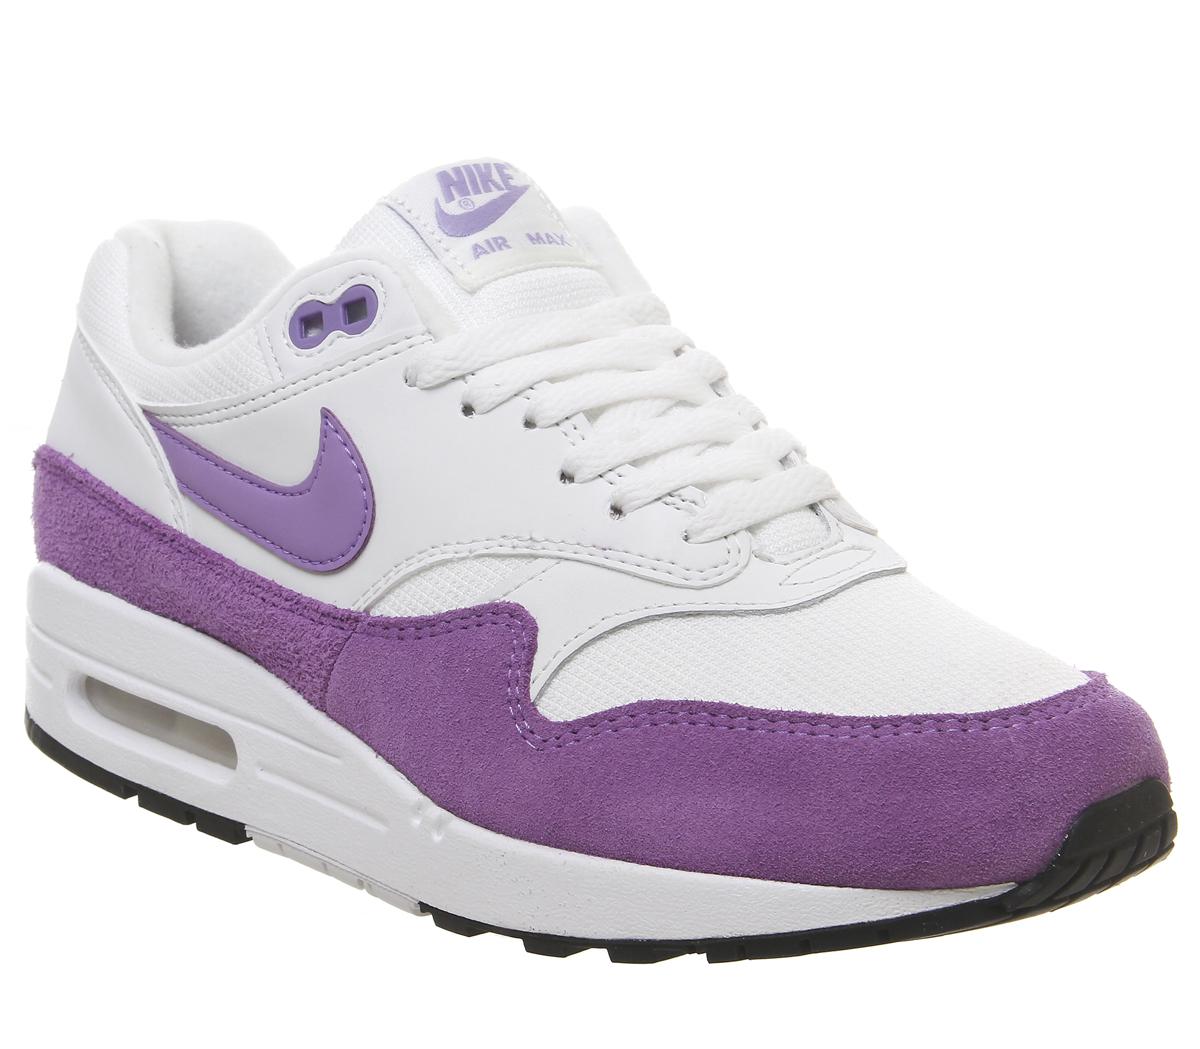 Boquilla bosque Los Alpes Nike Air Max 1 Trainers Summit White Atomic Violet Black - Hers trainers